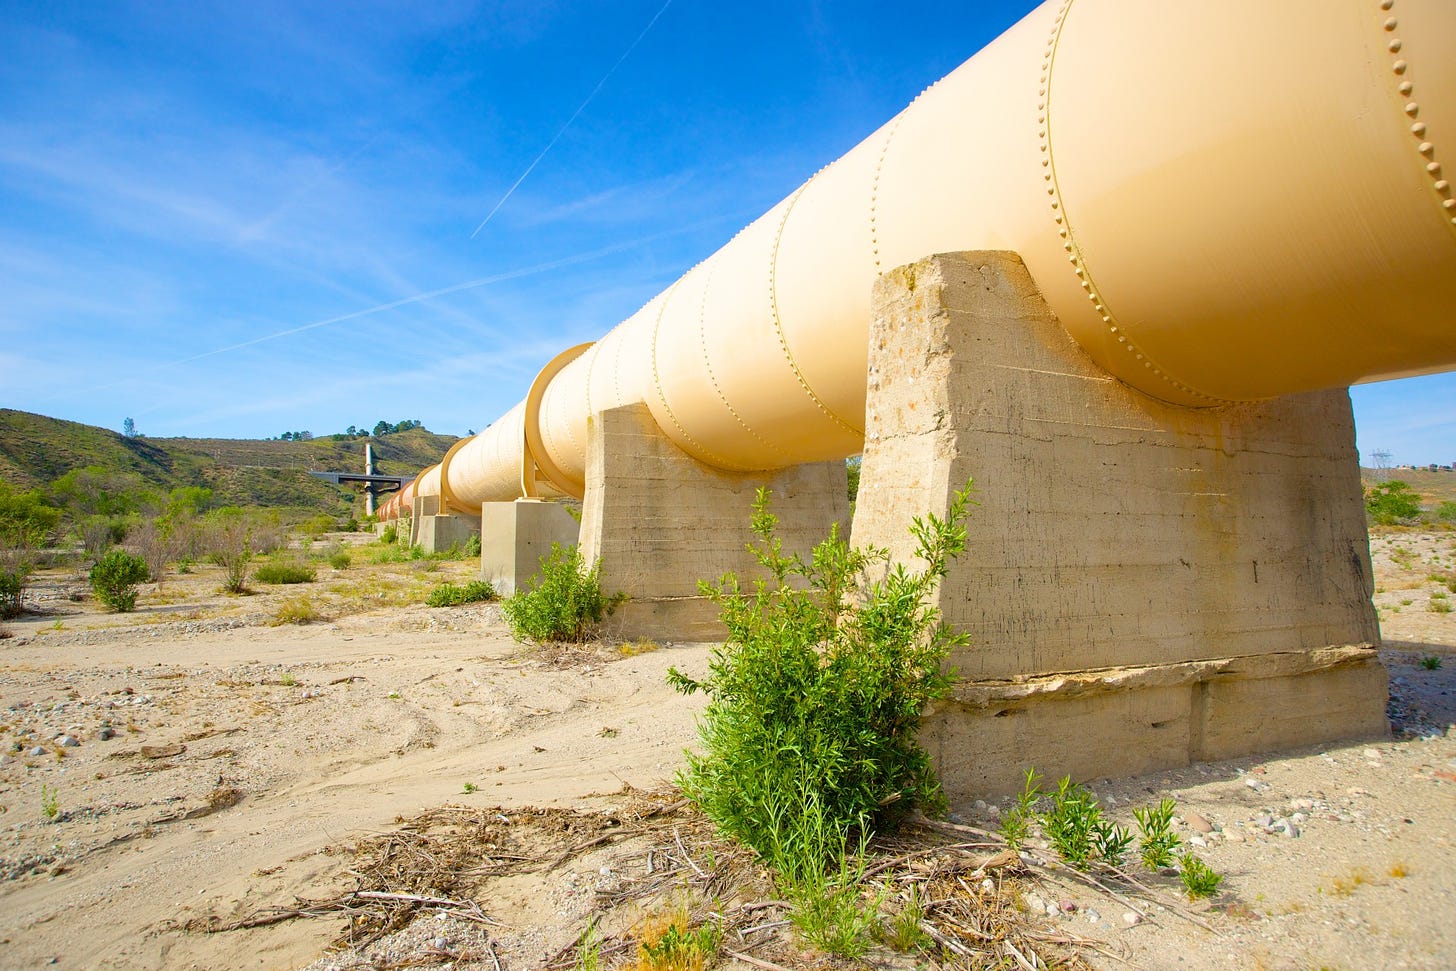 A yellow pipeline against a blue sky in the desert. Photo by Ken Kistler.